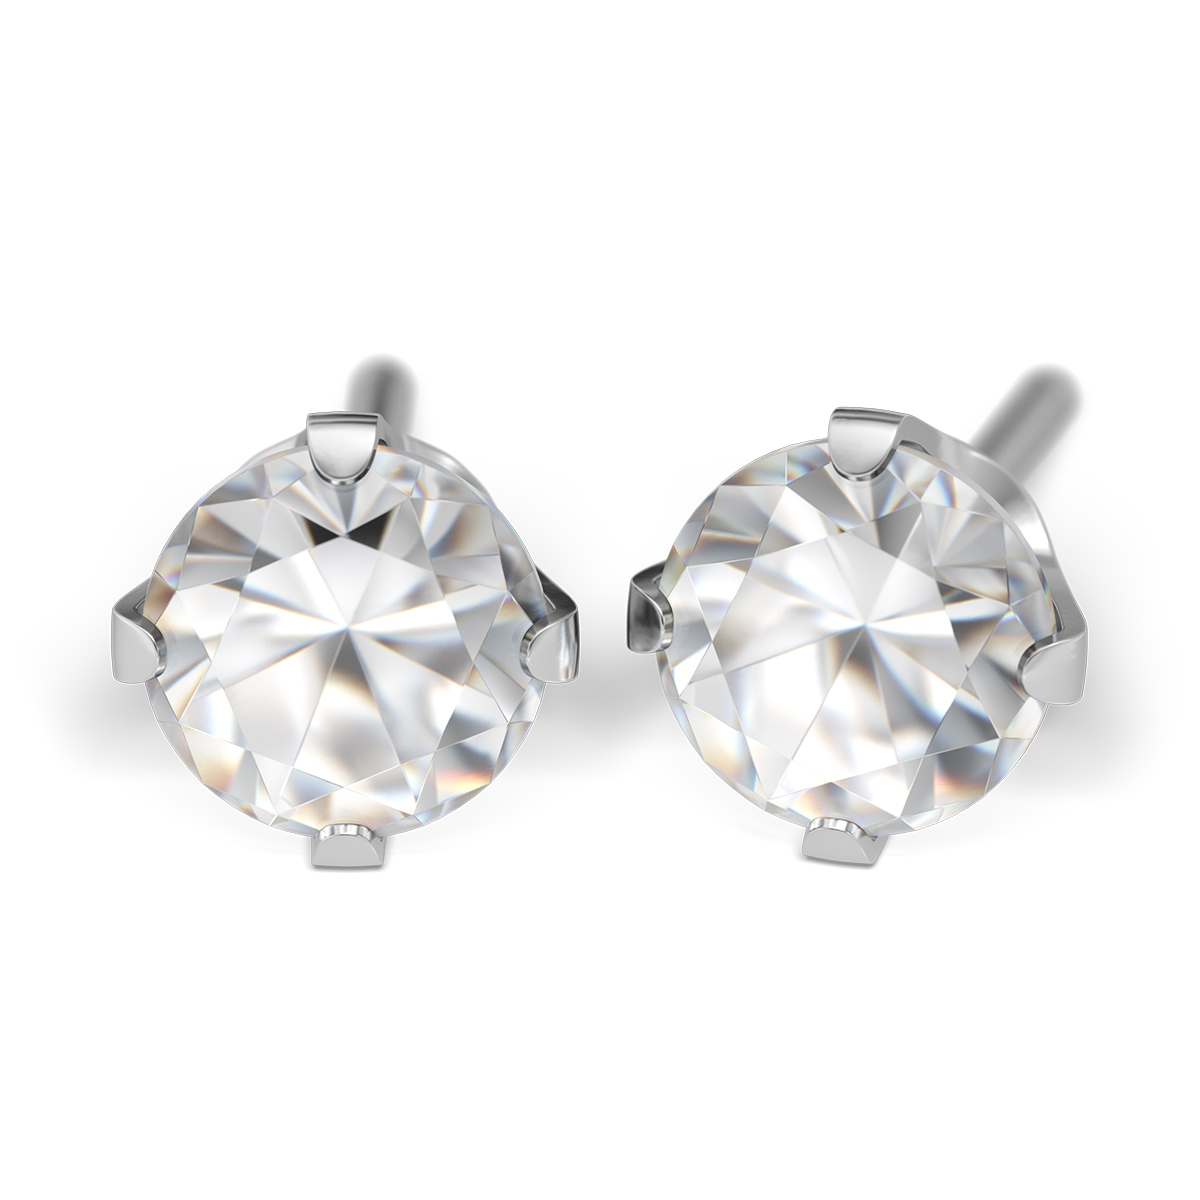 System 75 ear studs 14 ct yellow gold white rhodium plated